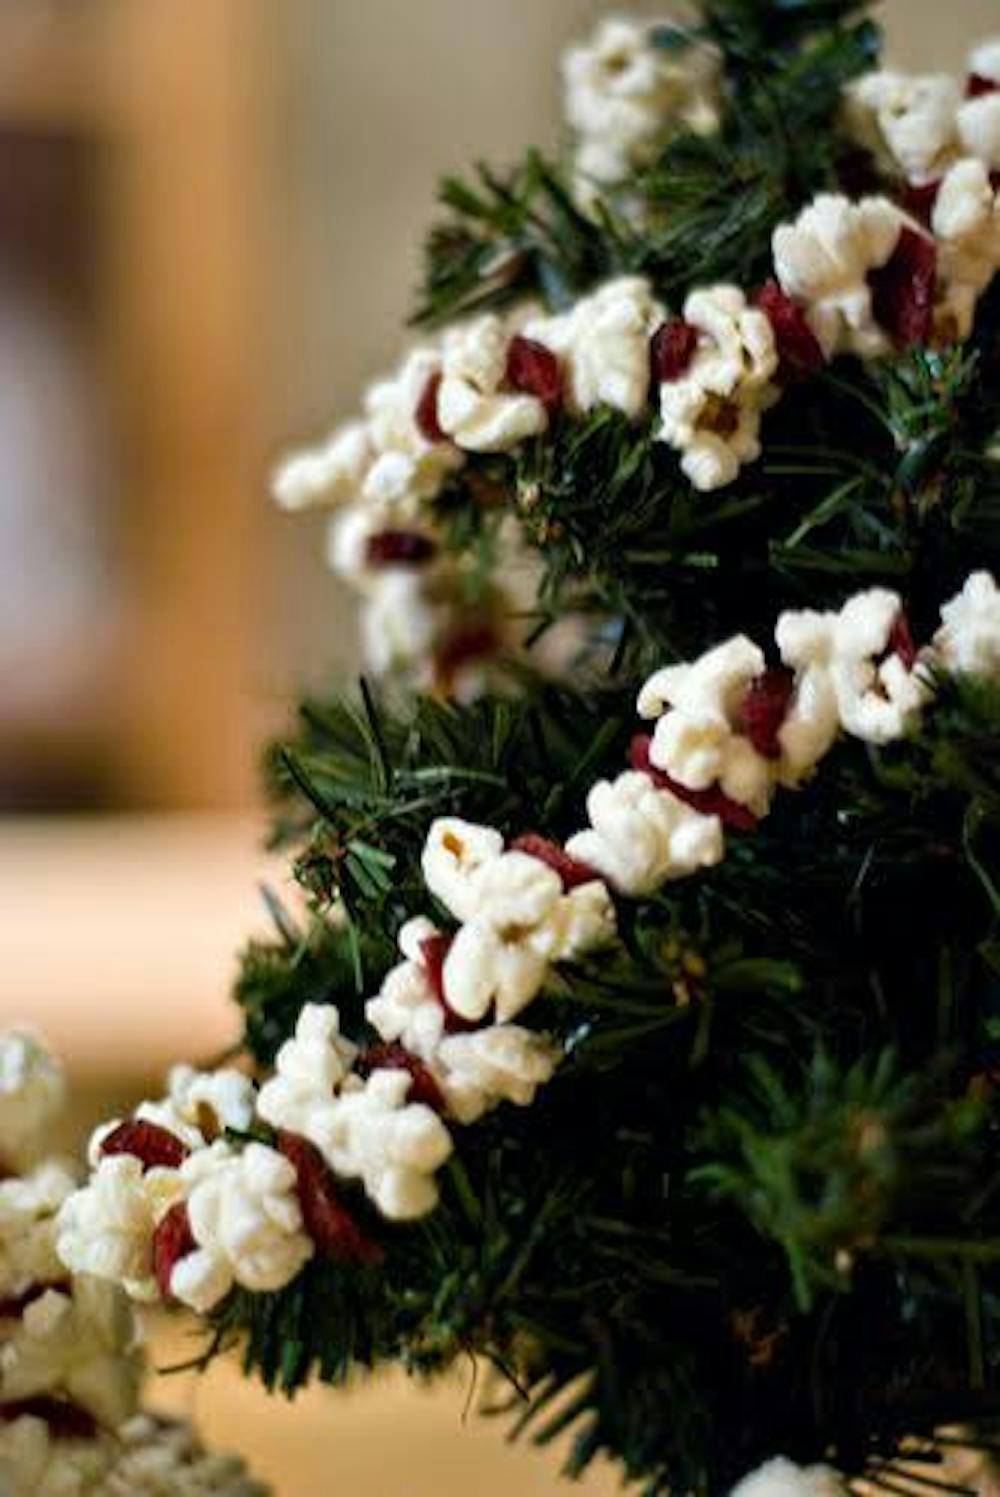 flickr.com
Adding a popcorn garland to your tree is not only affordable - it also serves as a reminder of Christmasses gone by. 